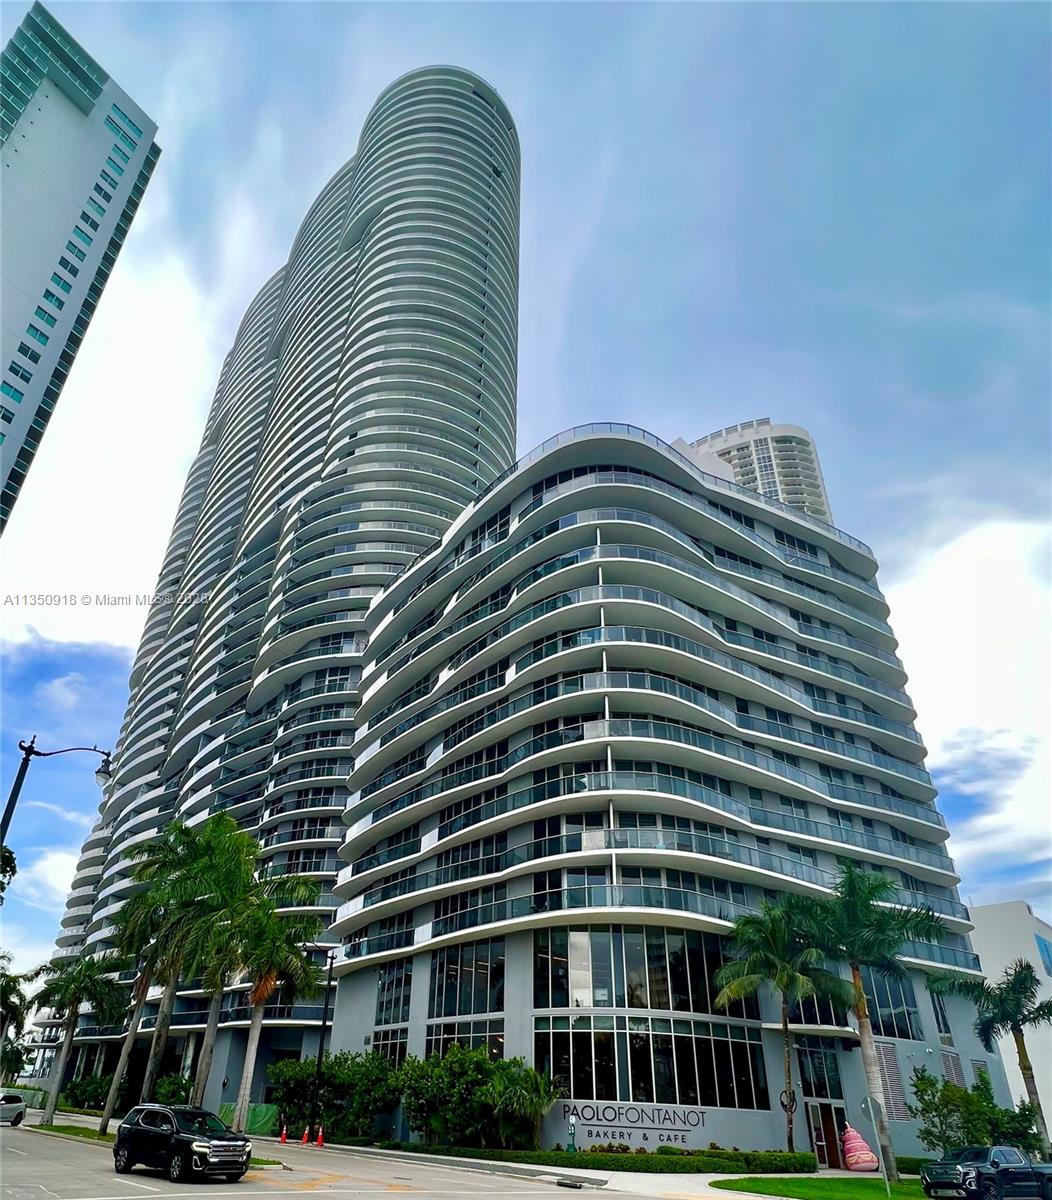 A Bright and beautiful 2 bed 2.5 baths with state of the art European kitchen and appliances, marble floors and countertop, an amazing open balcony overlooking a spectacular view of the city of Miami and including amazing sunsets. this great condo is in a very desirable neighborhood located in EDGE WATER near midtown, it is in front of Marget Peace Park lot with unobstructed views and fresh air to breath this all is near restaurants and cafes, shops, min drive to Mary Brickell Village and Brickell City Center and Aventura mall, skyline train system, minutes to Wynwood, the art and design district, minutes to Miami airport, and 20 min drive South Beach Art Deco district. This Amazing building provides a lavish elegant lobby, excellent amenities, 24 hrs doorman, valet and concierge service